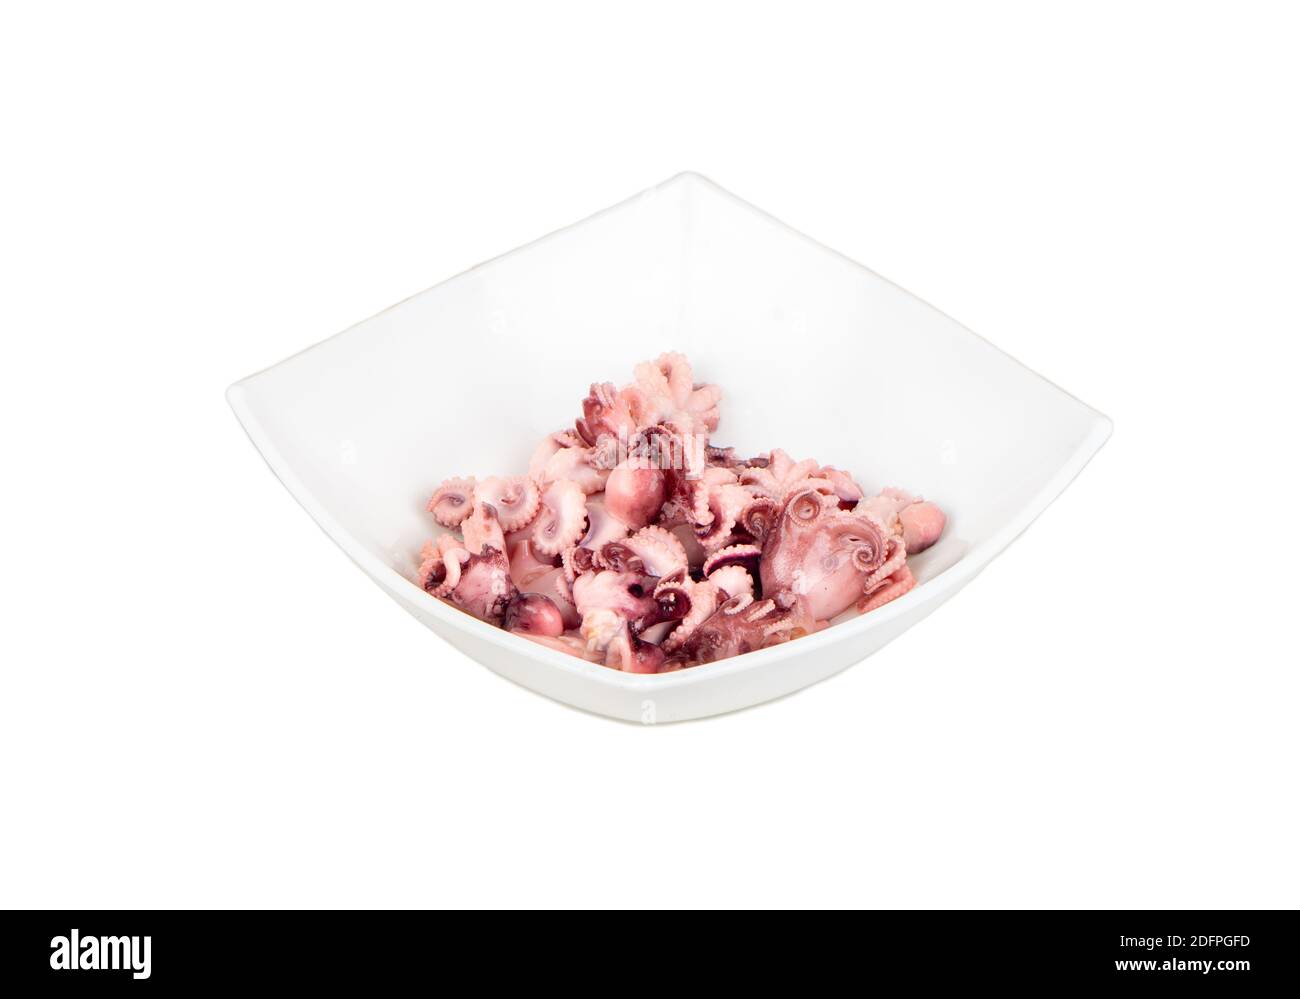 Small pickled octopus in a ceramic bowl on a white background Stock Photo